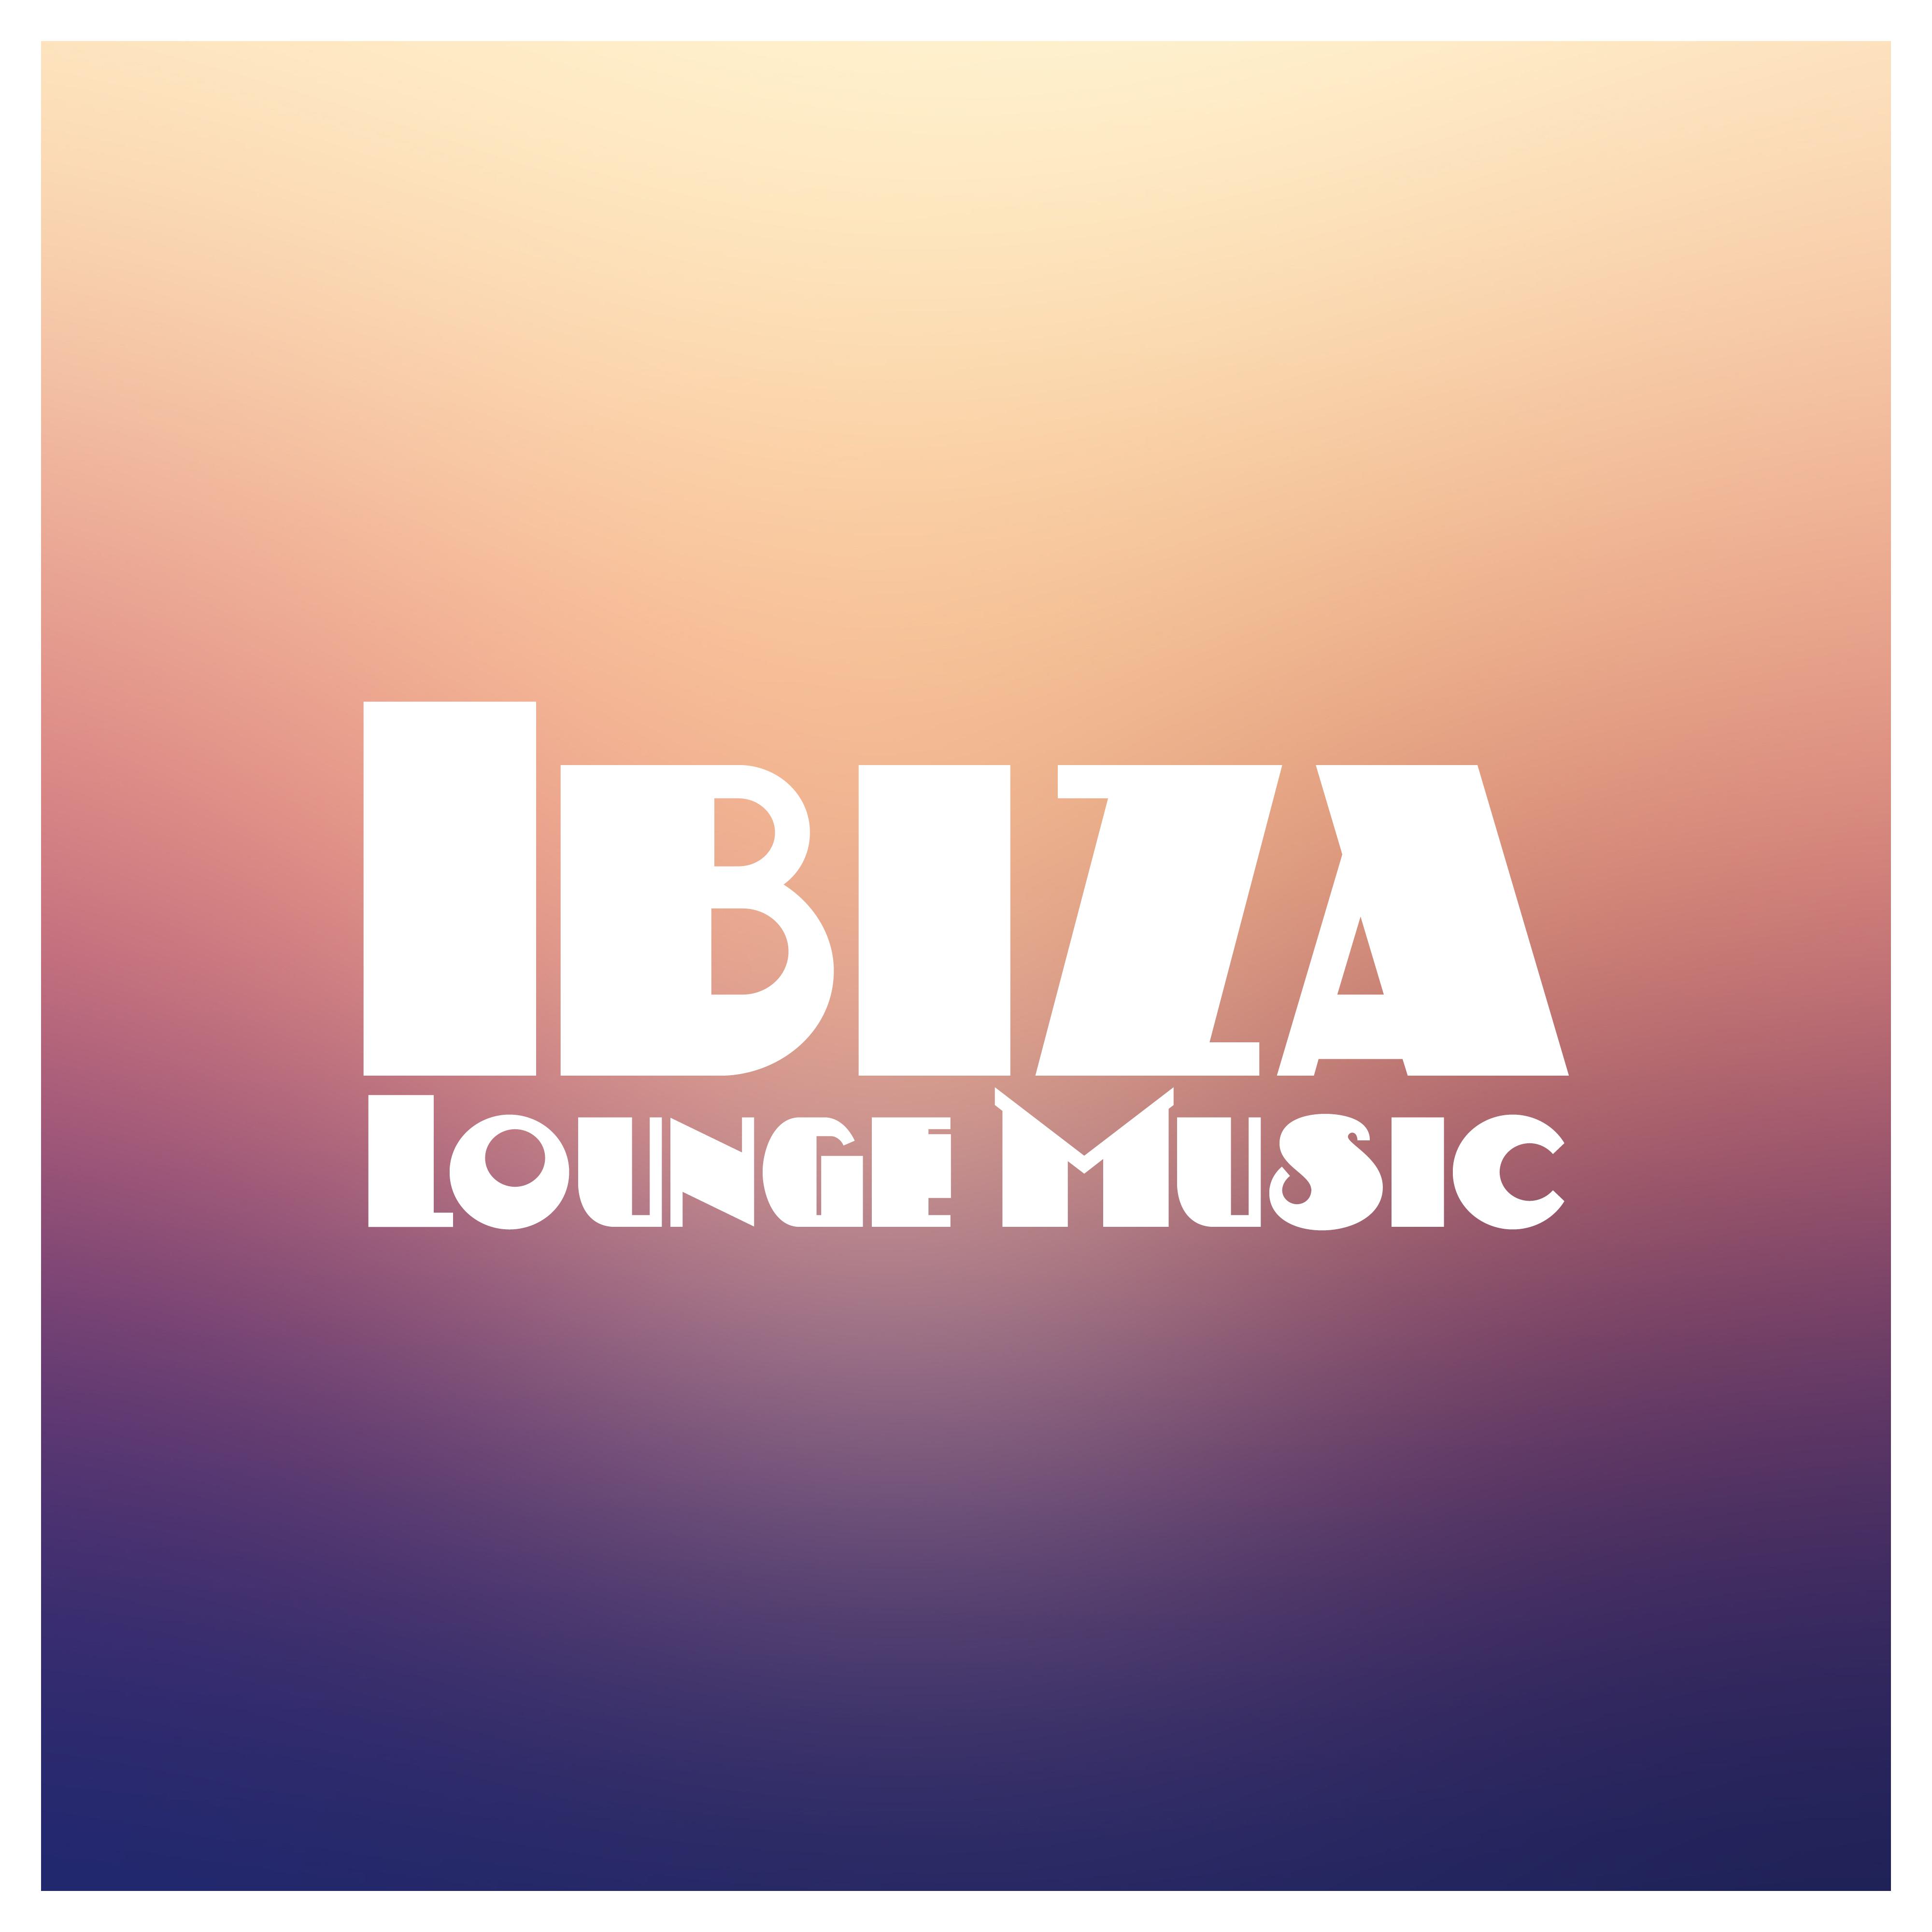 Ibiza Lounge Music – Summer Sounds, Peaceful Melodies, Relaxing Music, Chill Out Songs, Ibiza Relaxation